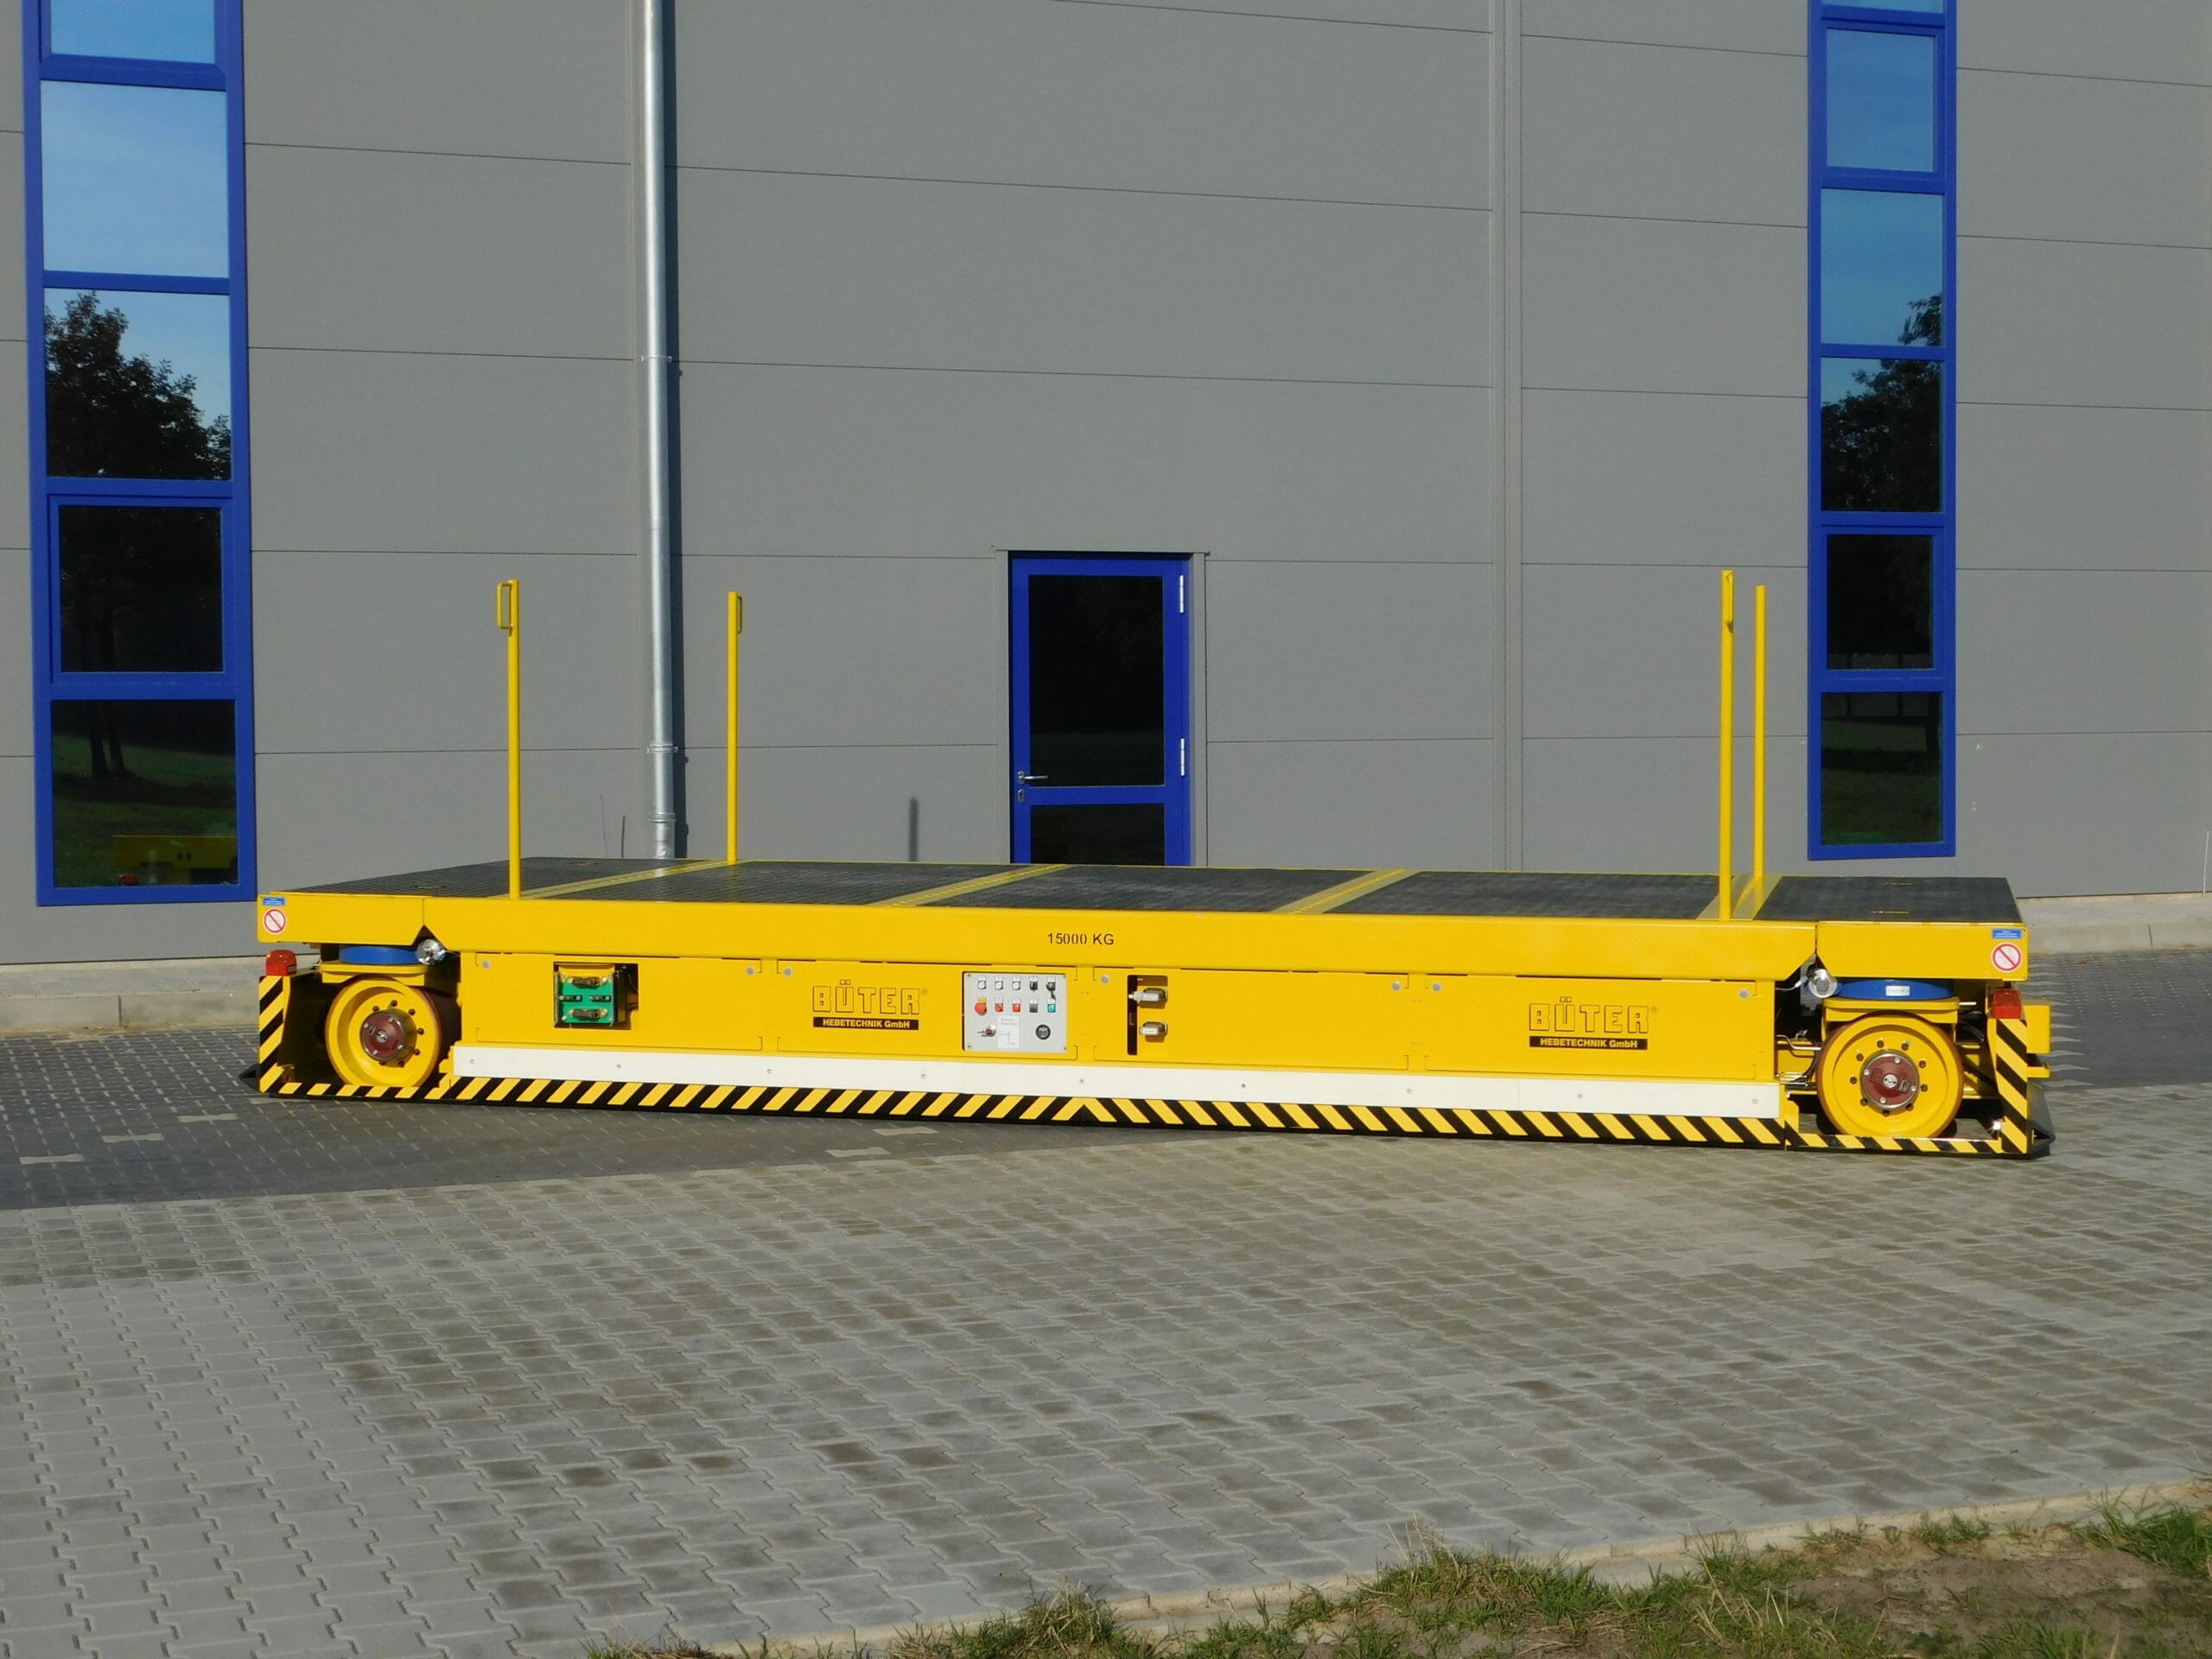 Figure Heavy-duty transporter sizing more than 10 tons